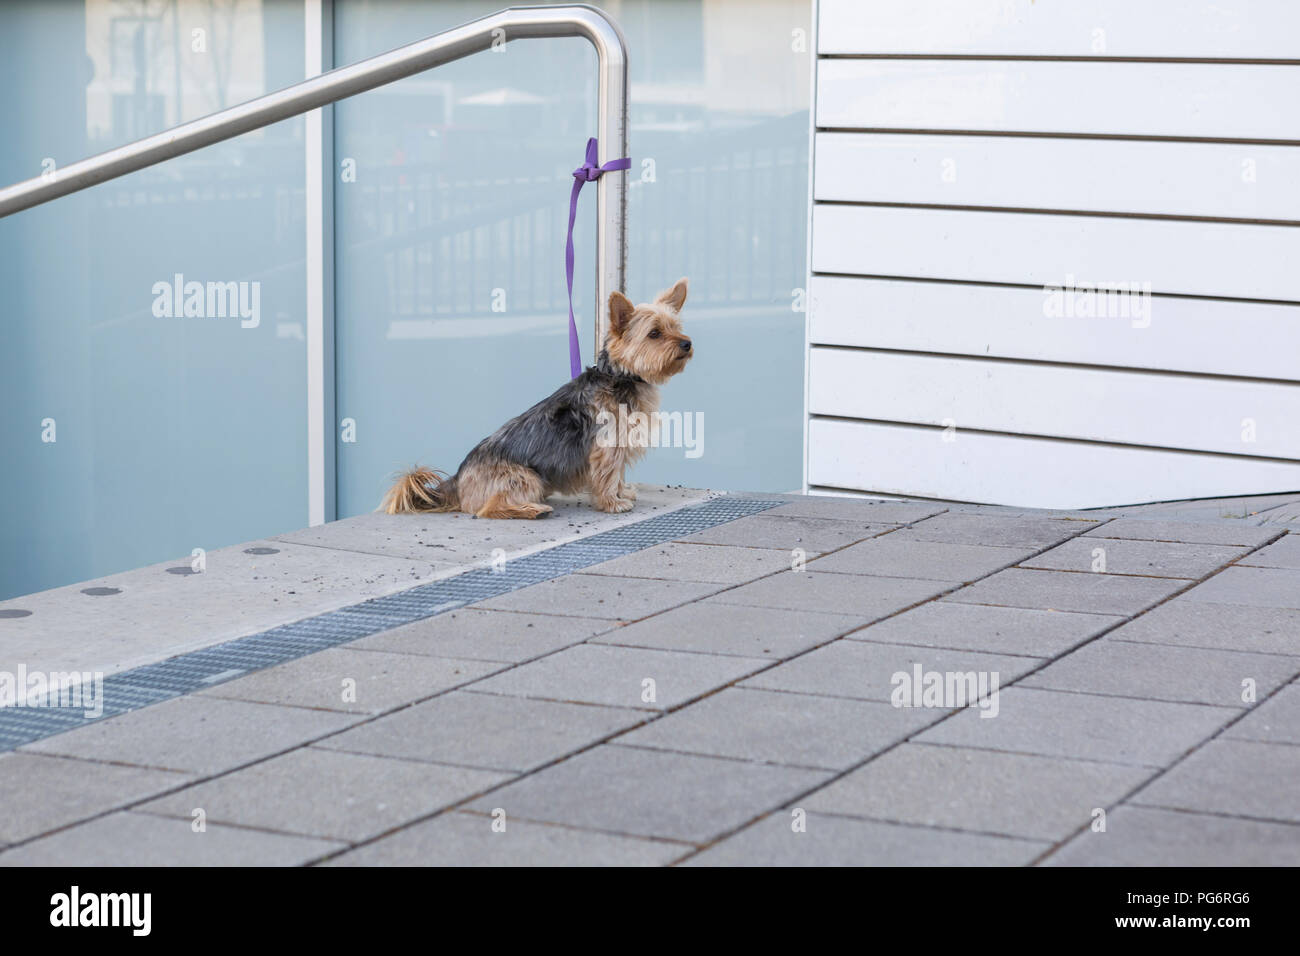 Yorkshire Terrier waiting outdoors Stock Photo